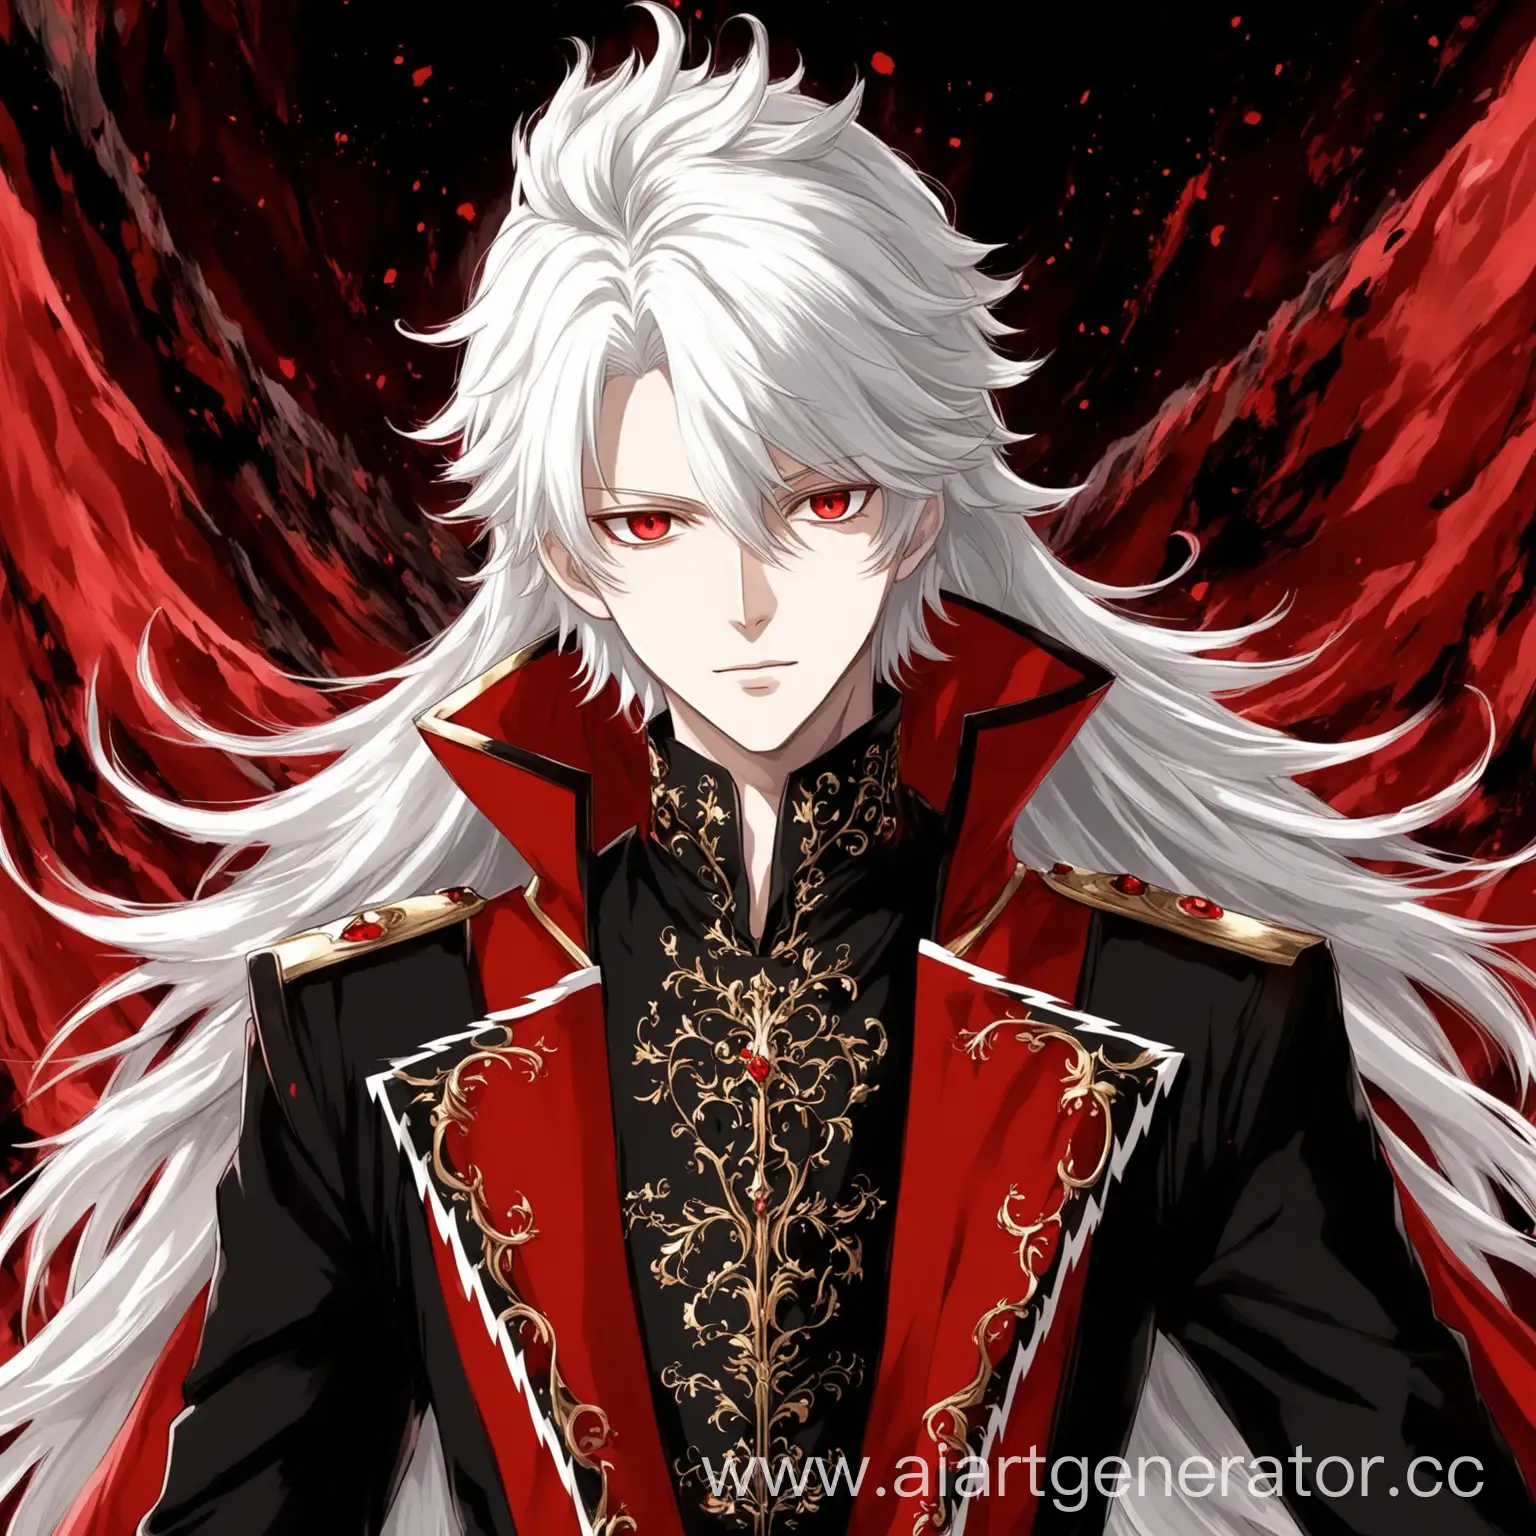 Elegant-Anime-Prince-with-Piercing-Red-Eyes-and-Ivory-Hair-in-Striking-Black-and-Crimson-Attire